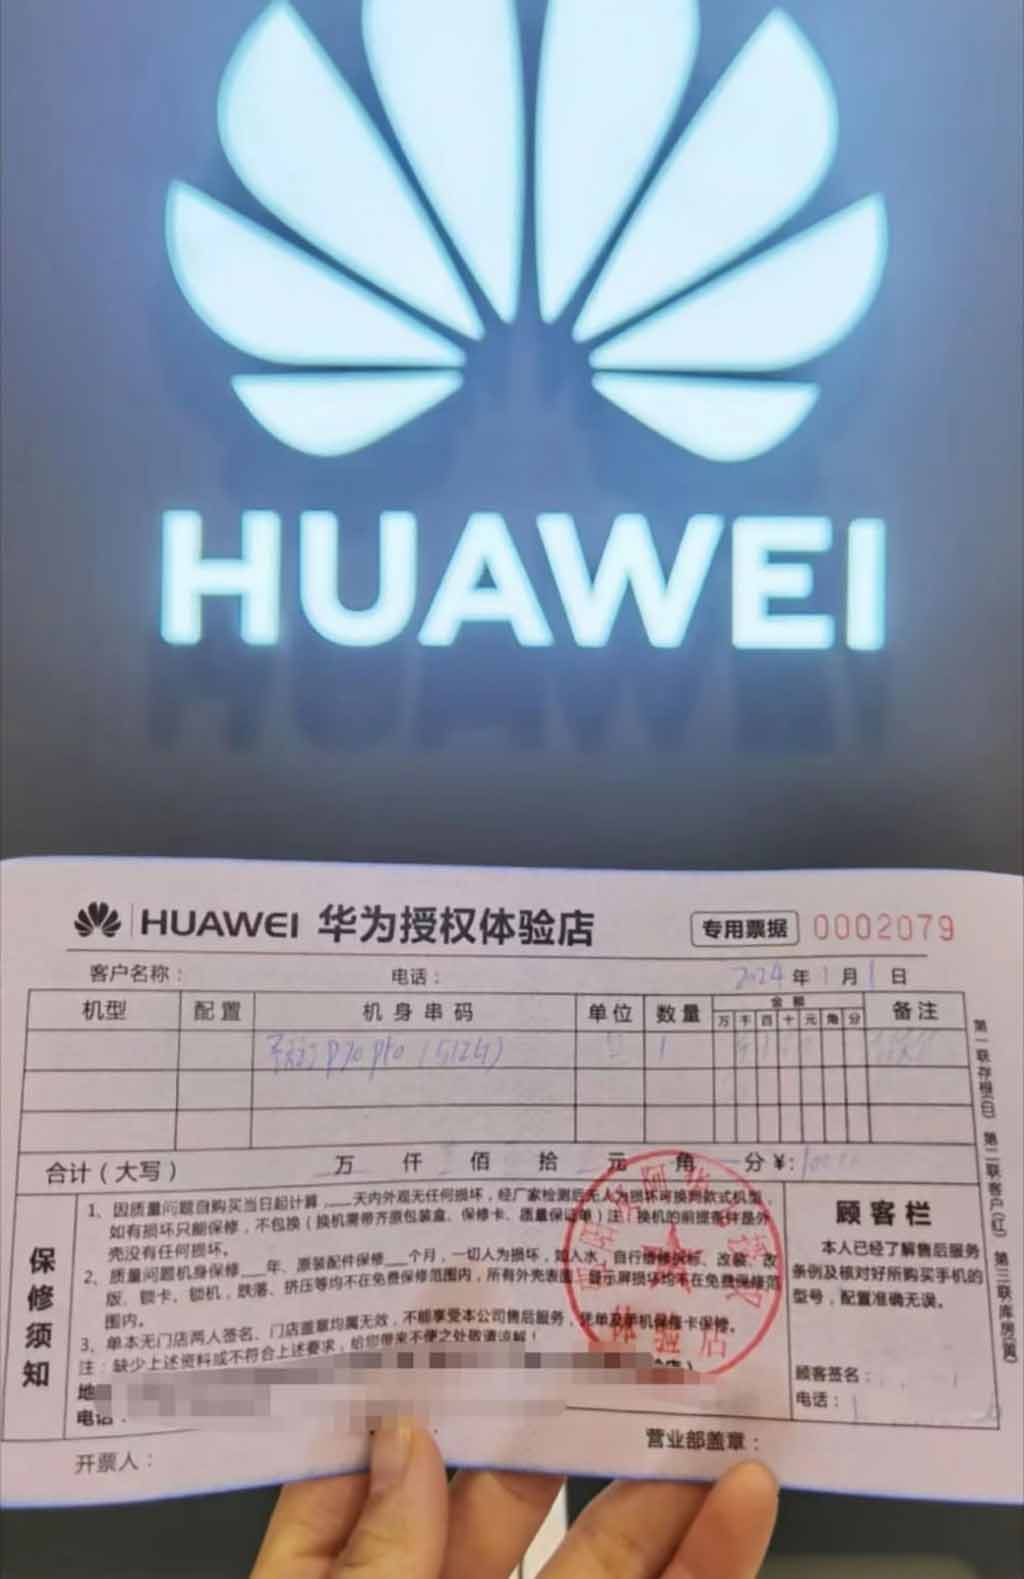 Huawei P70 series blind reservations